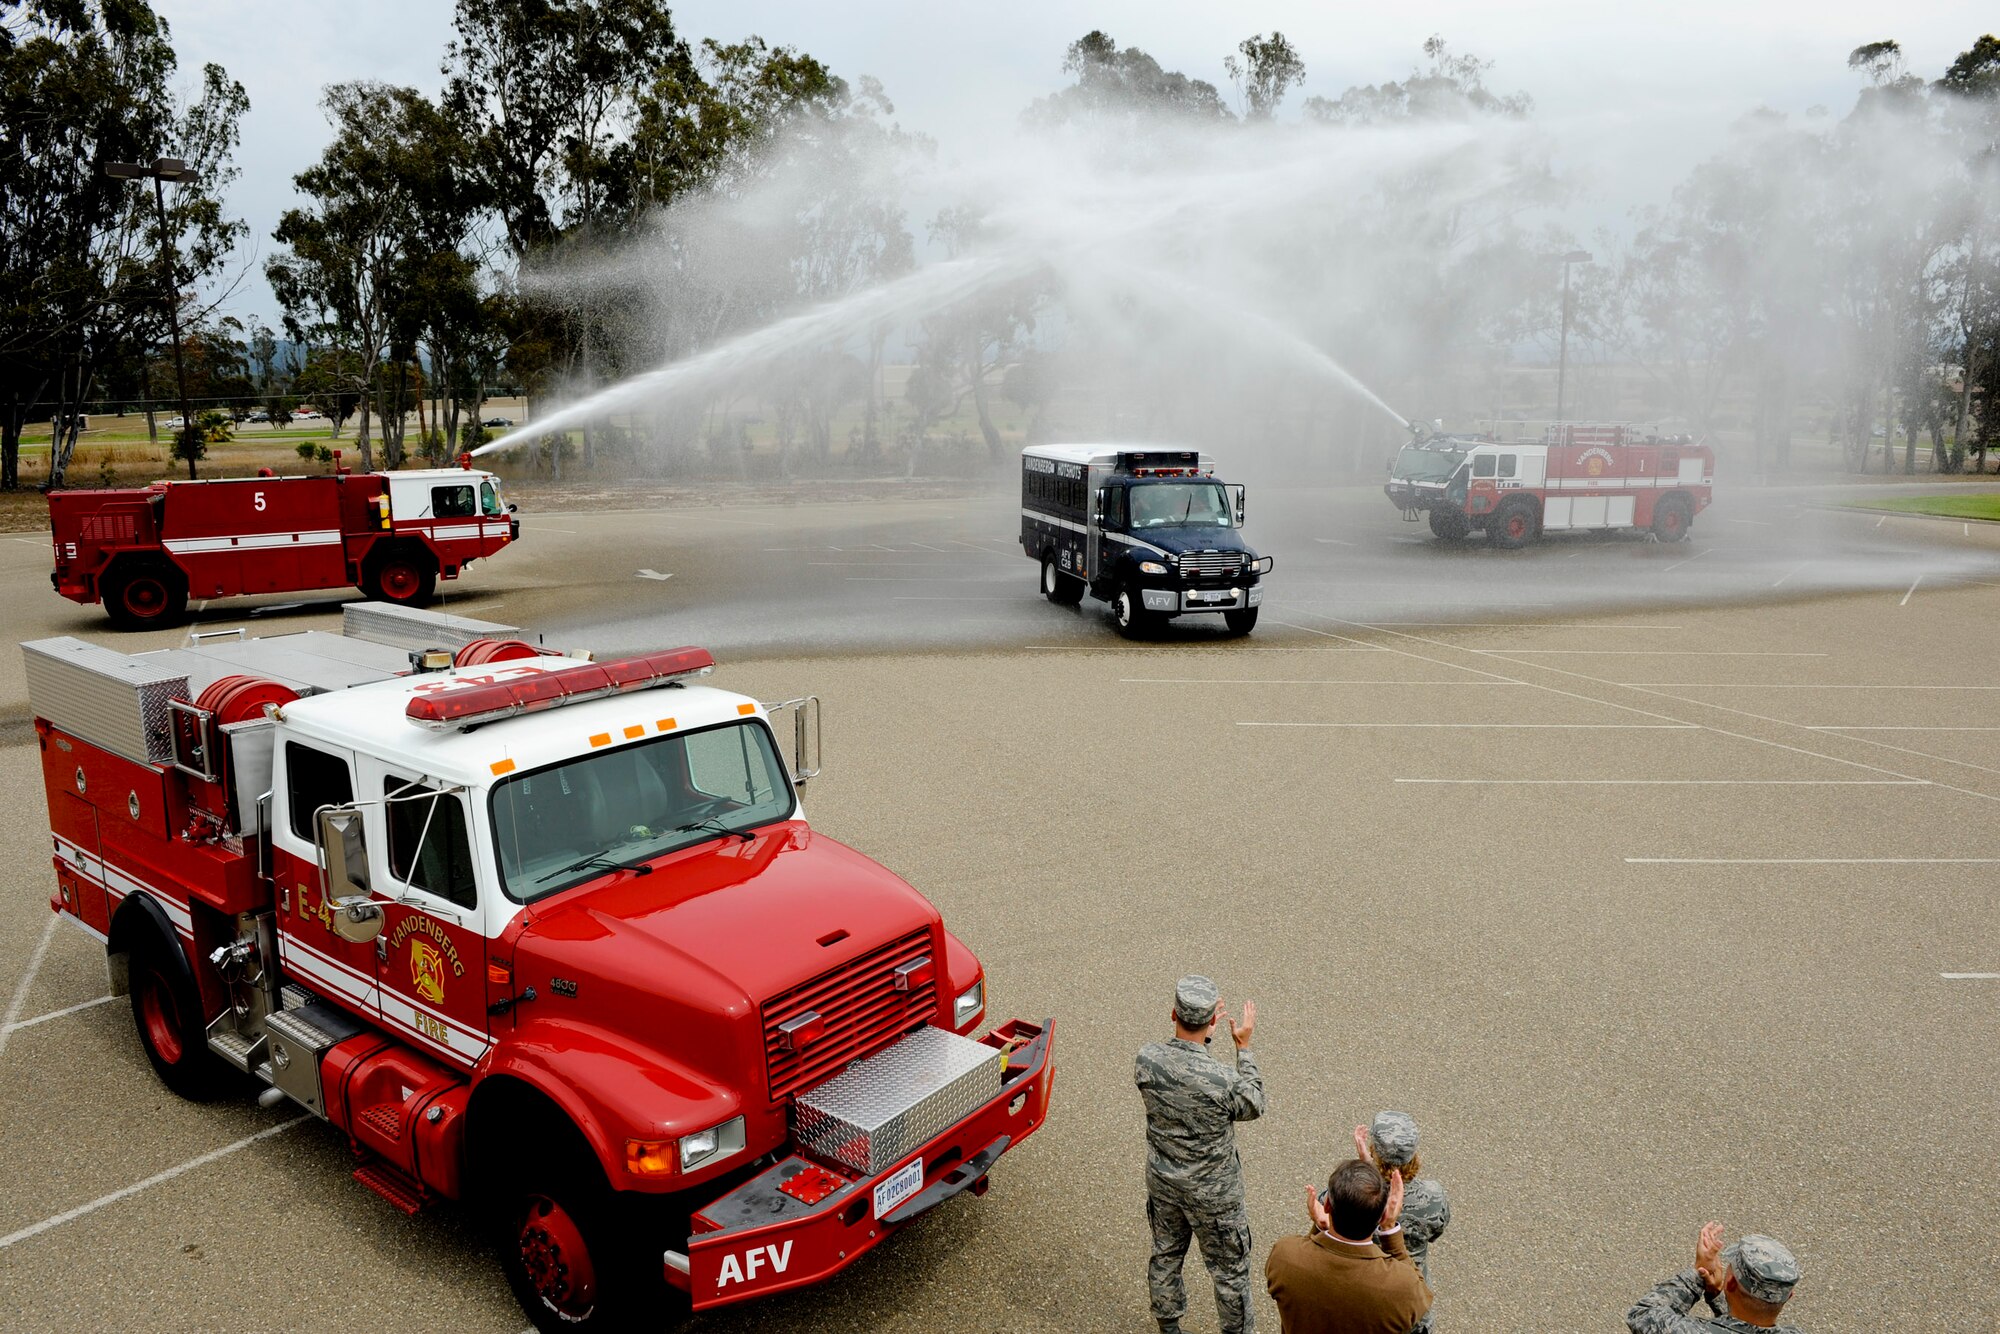 VANDENBERG AIR FORCE BASE, Calif. -- A Vandenberg Hot Shots crew vehicle is doused by fire trucks as it arrives at the Pacific Coast Club here after returning from fighting wildfires in Colorado and Wyoming Thursday, July 12, 2012. Wildfires in Colorado and Wyoming burned 29,168 acres total and destroyed nearly 350 houses in Colorado. (U.S. Air Force photo/Staff Sgt. Levi Riendeau)